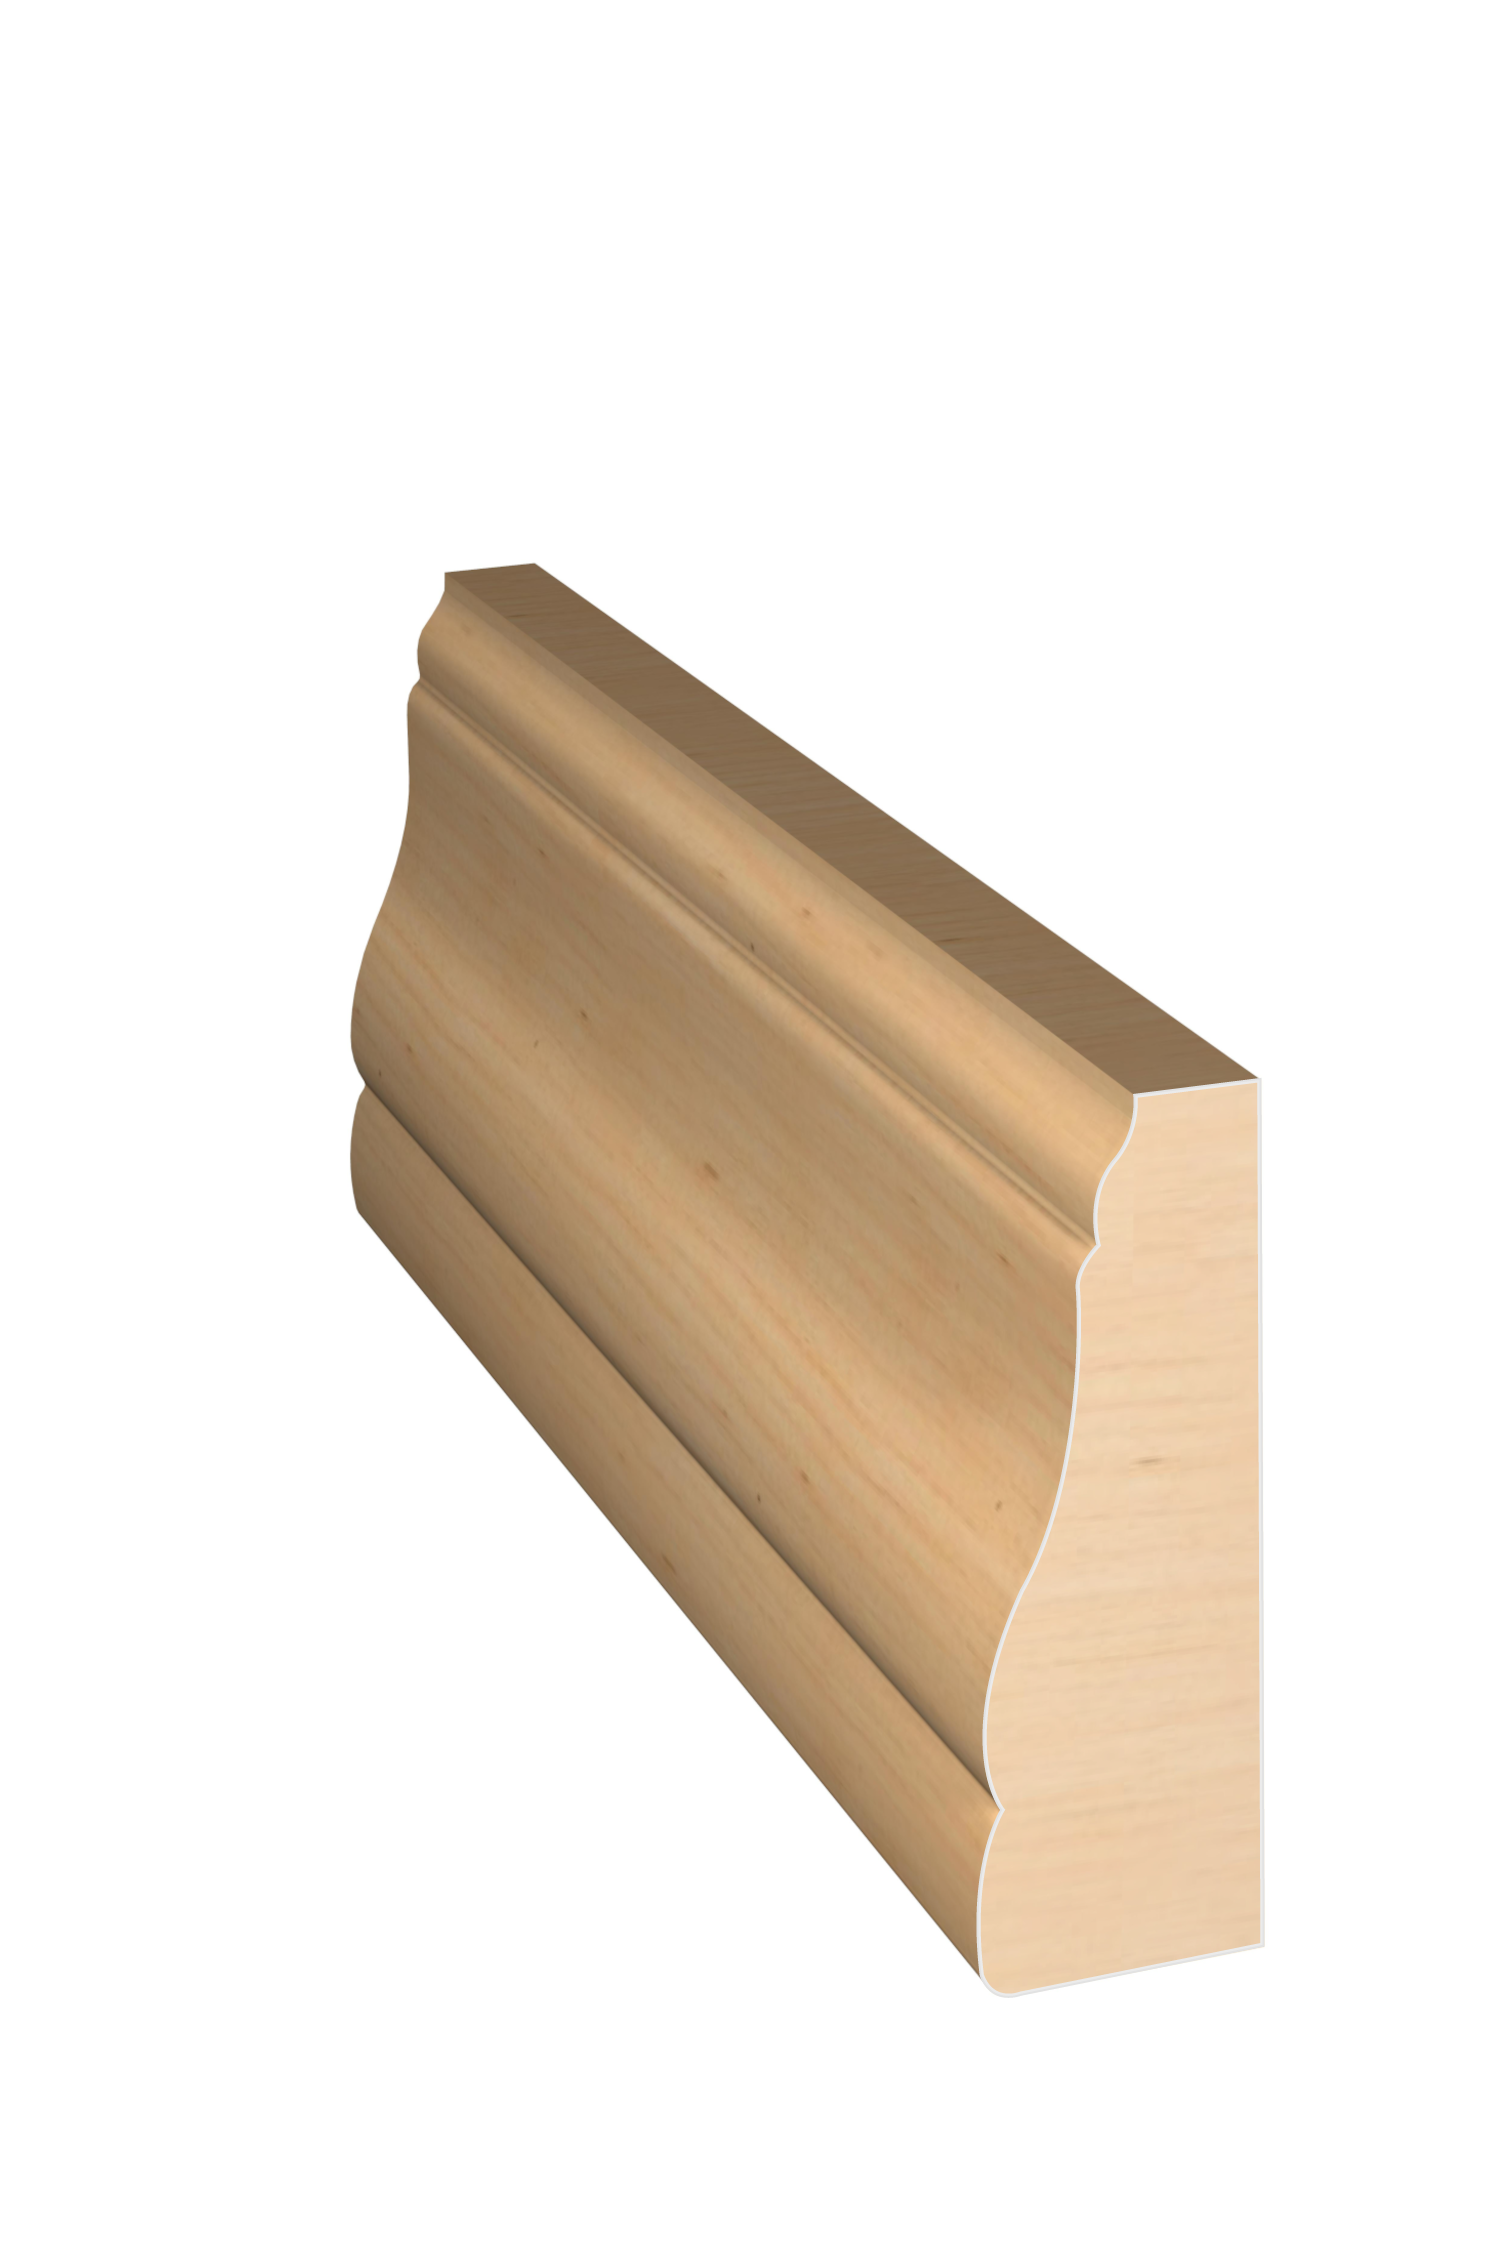 Three dimensional rendering of custom casing wood molding CAPL21429 made by Public Lumber Company in Detroit.